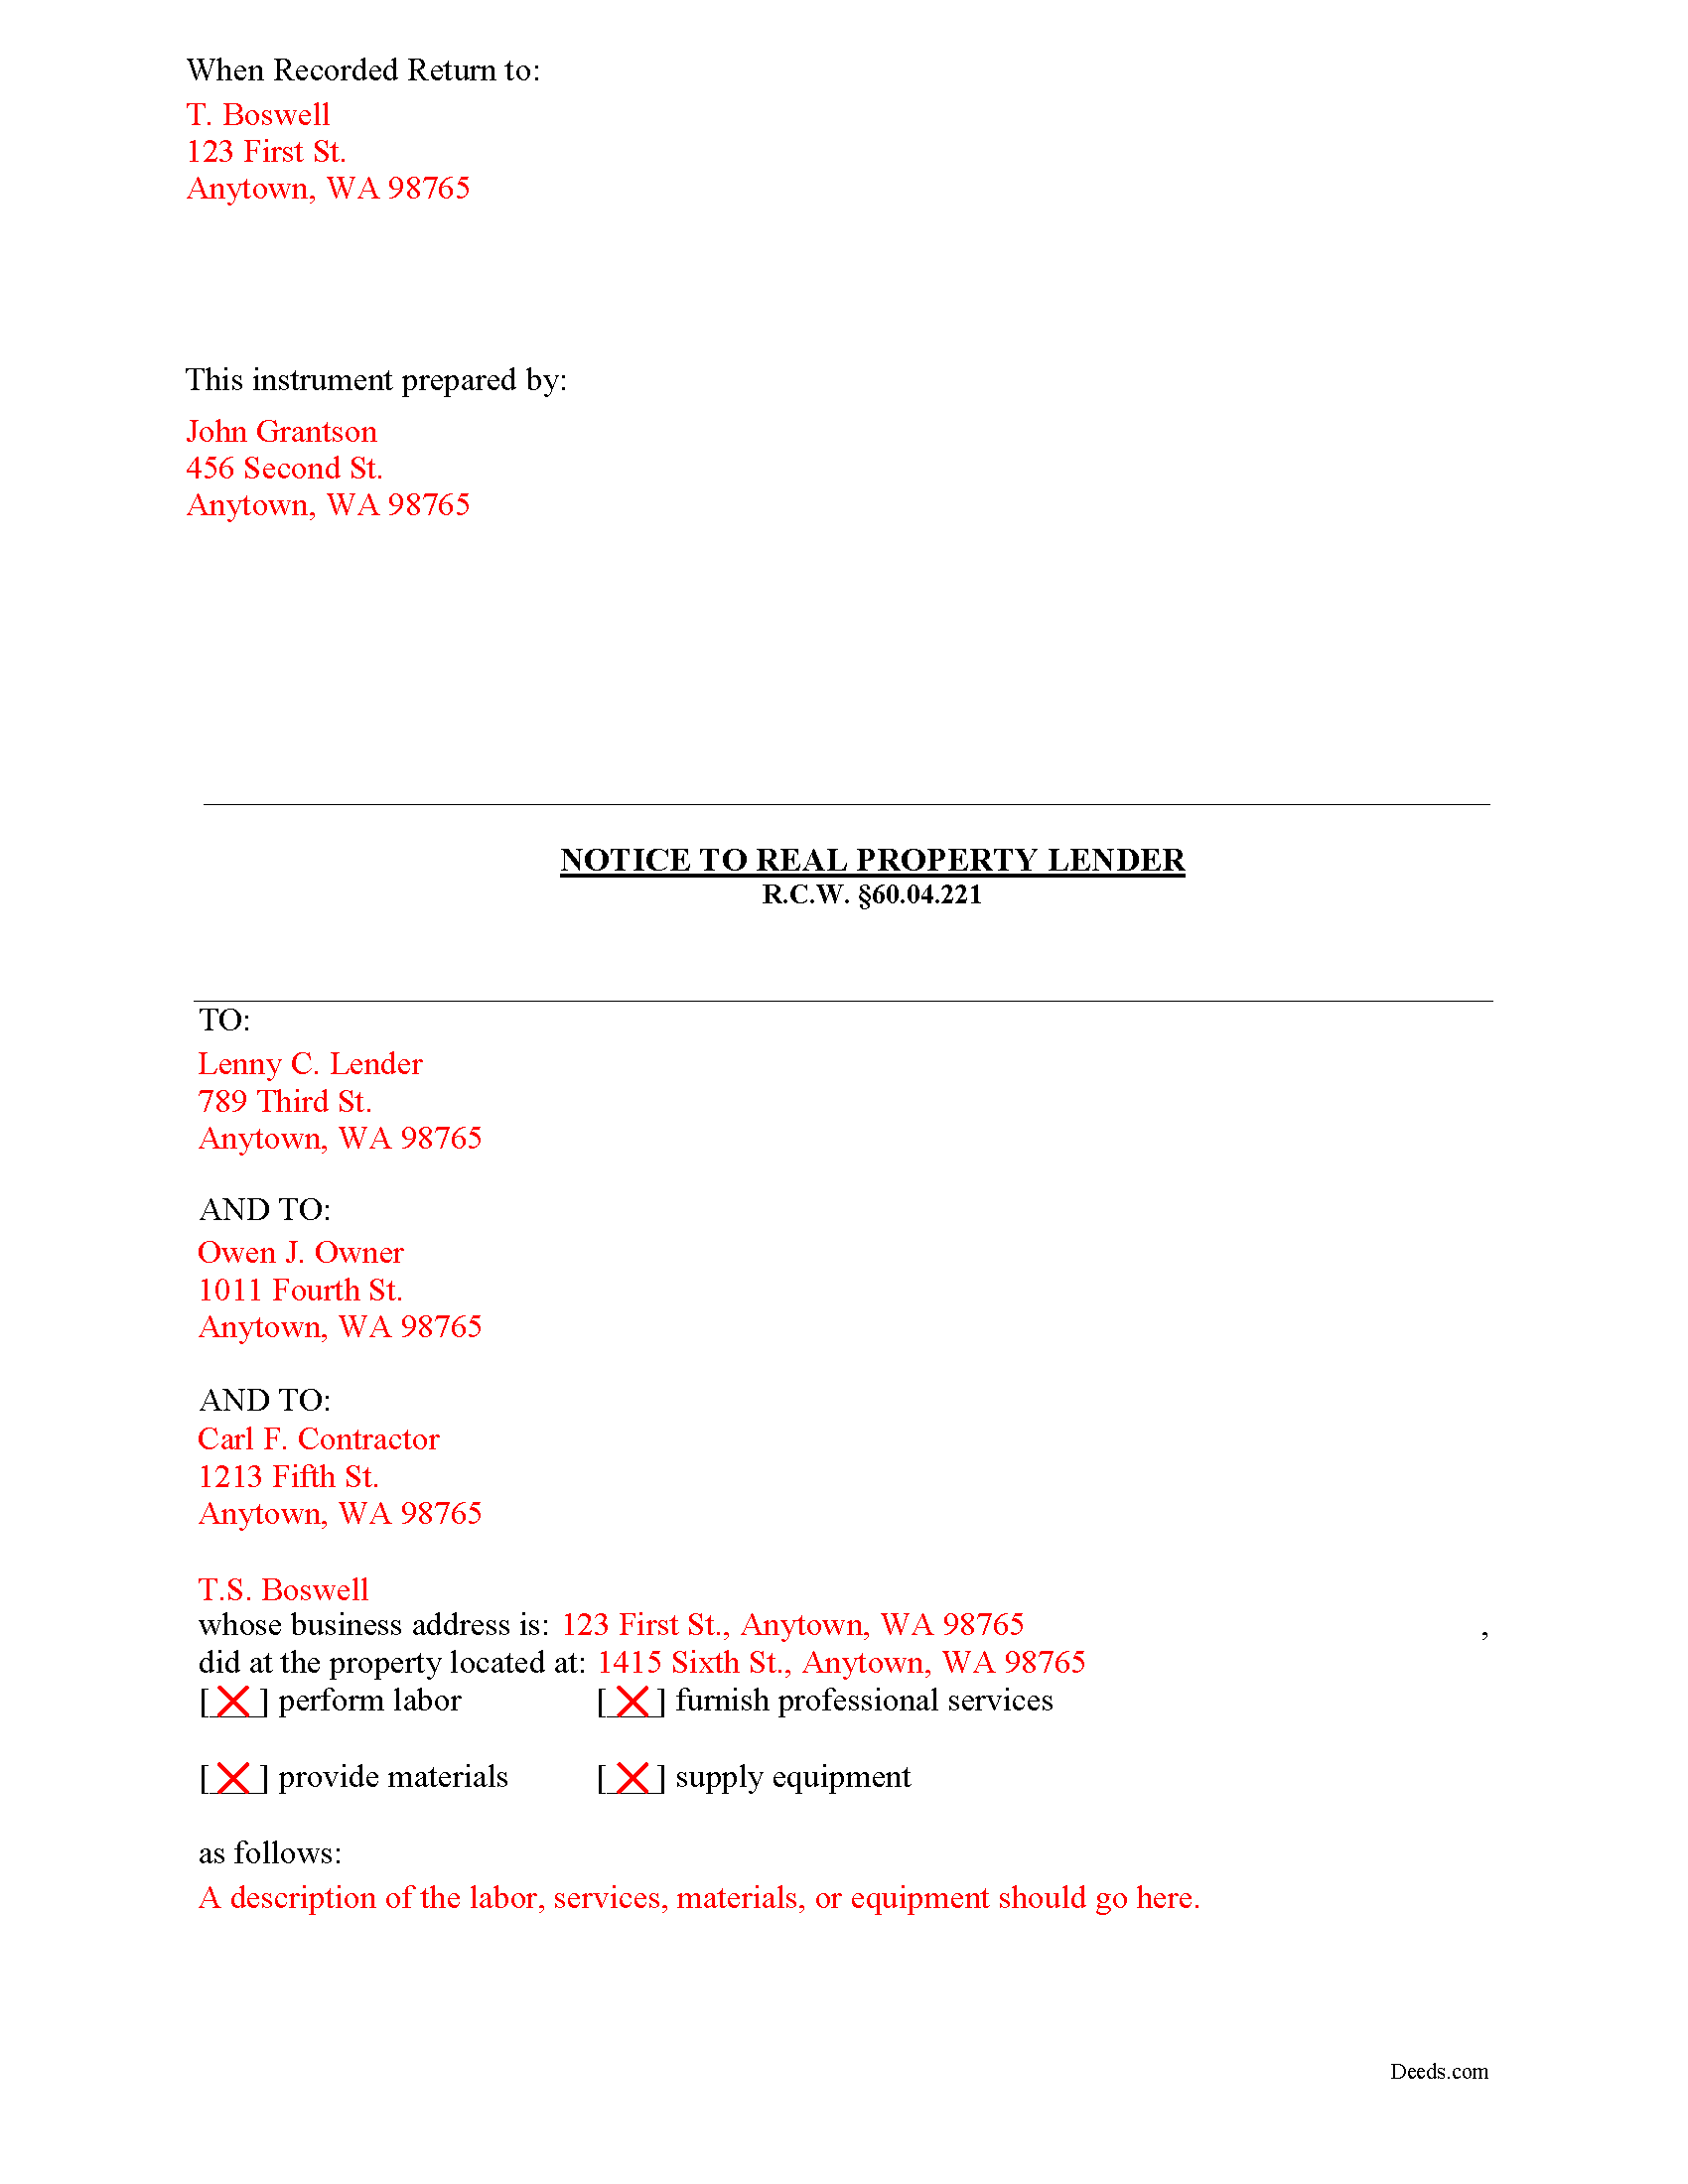 Completed Example of the Notice to Construction Lender Document